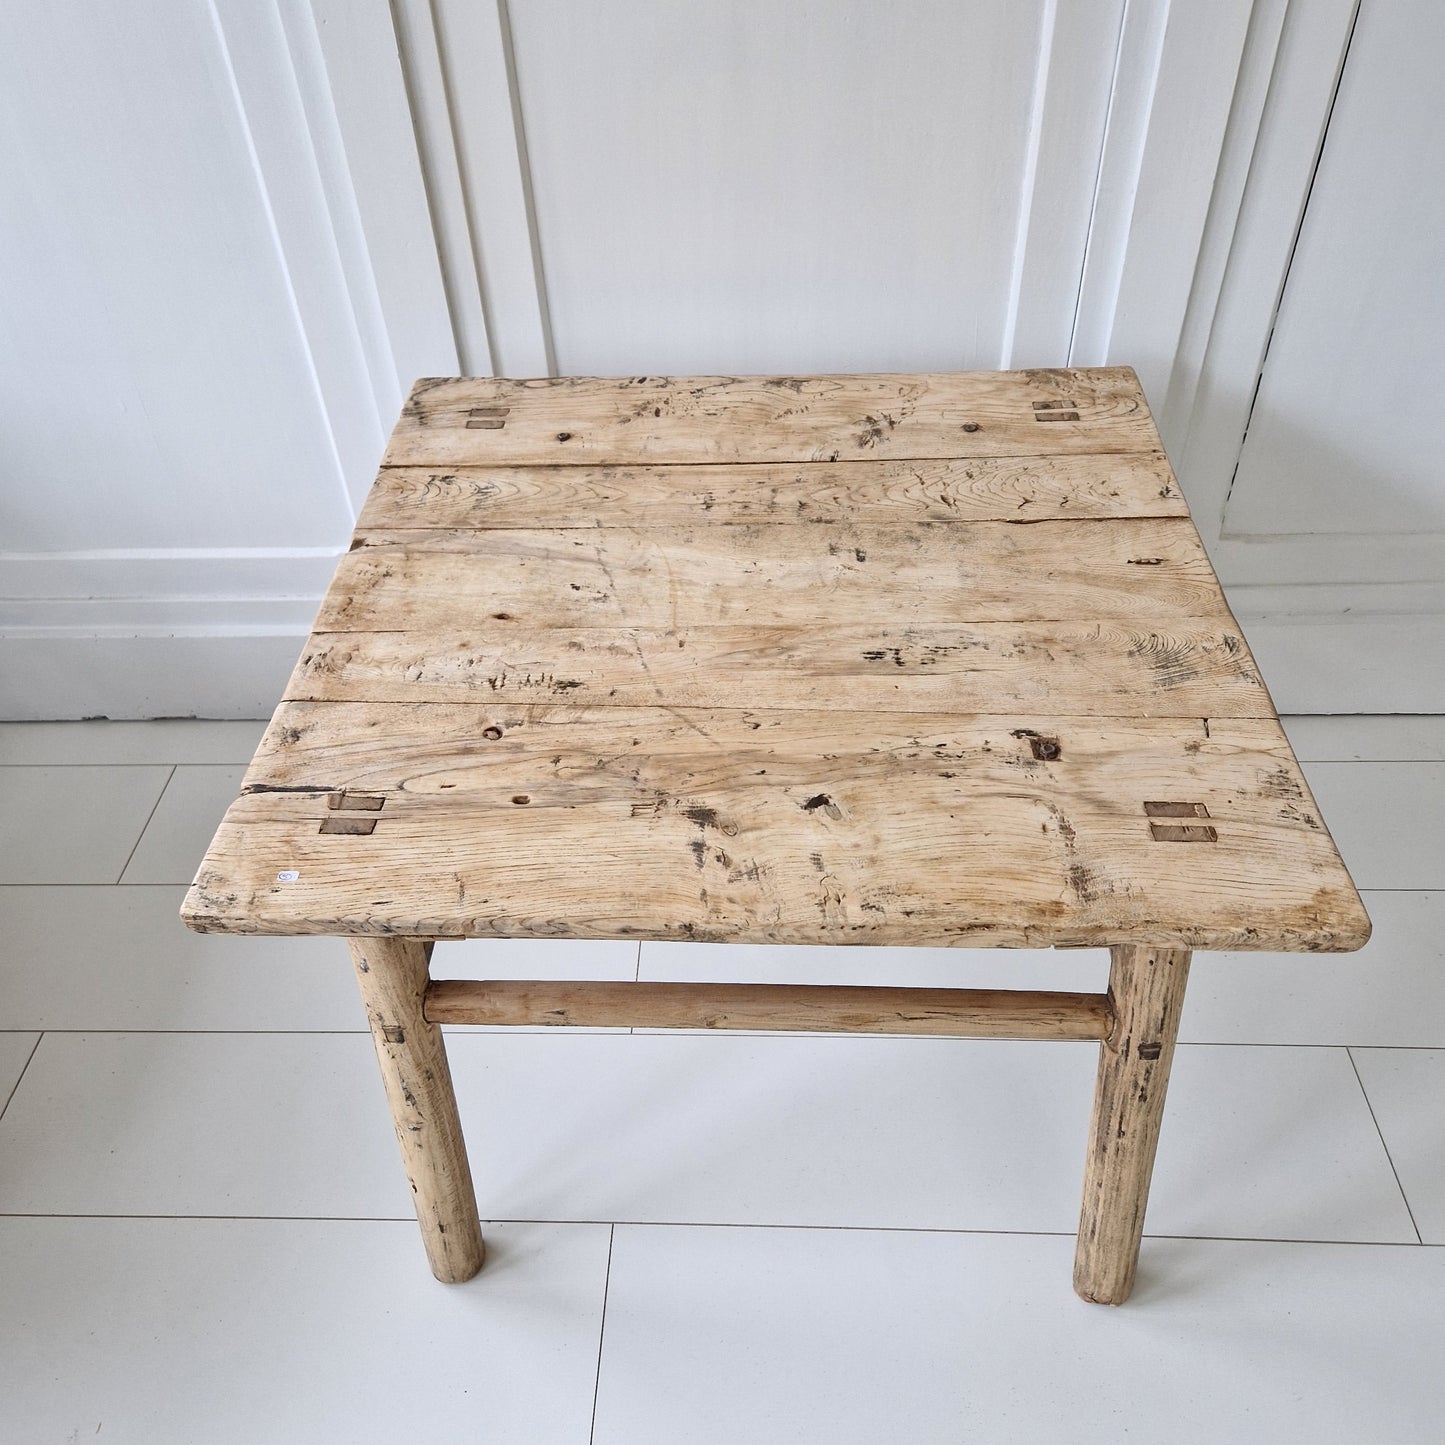 Chinese old wooden table No.5 (67x68x51,5cm)